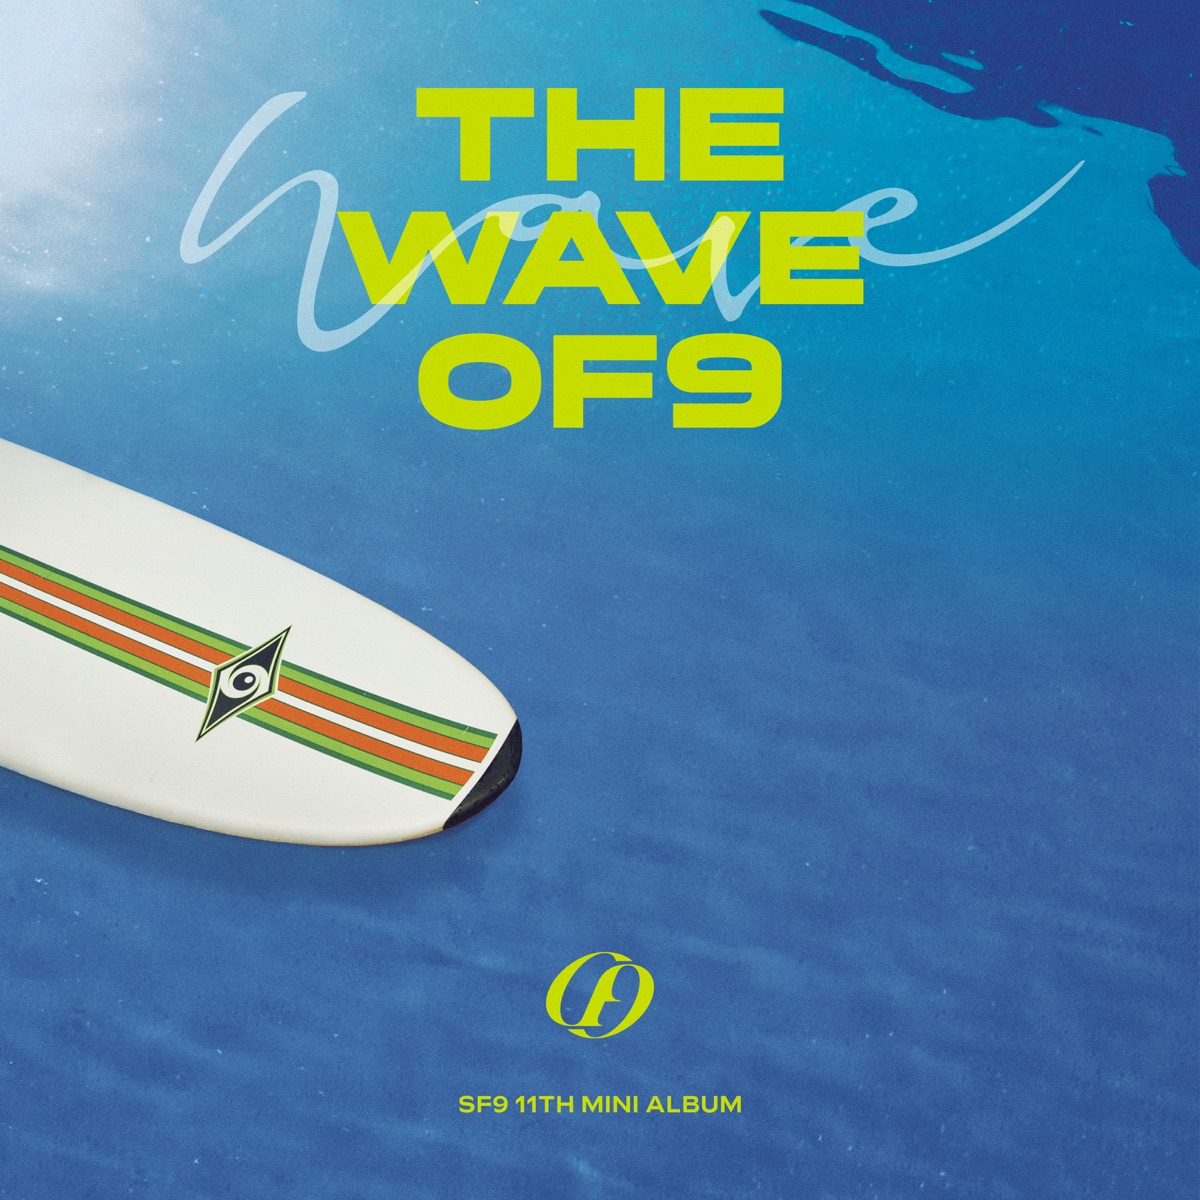 『SF9 - Butterfly』収録の『THE WAVE OF9』ジャケット